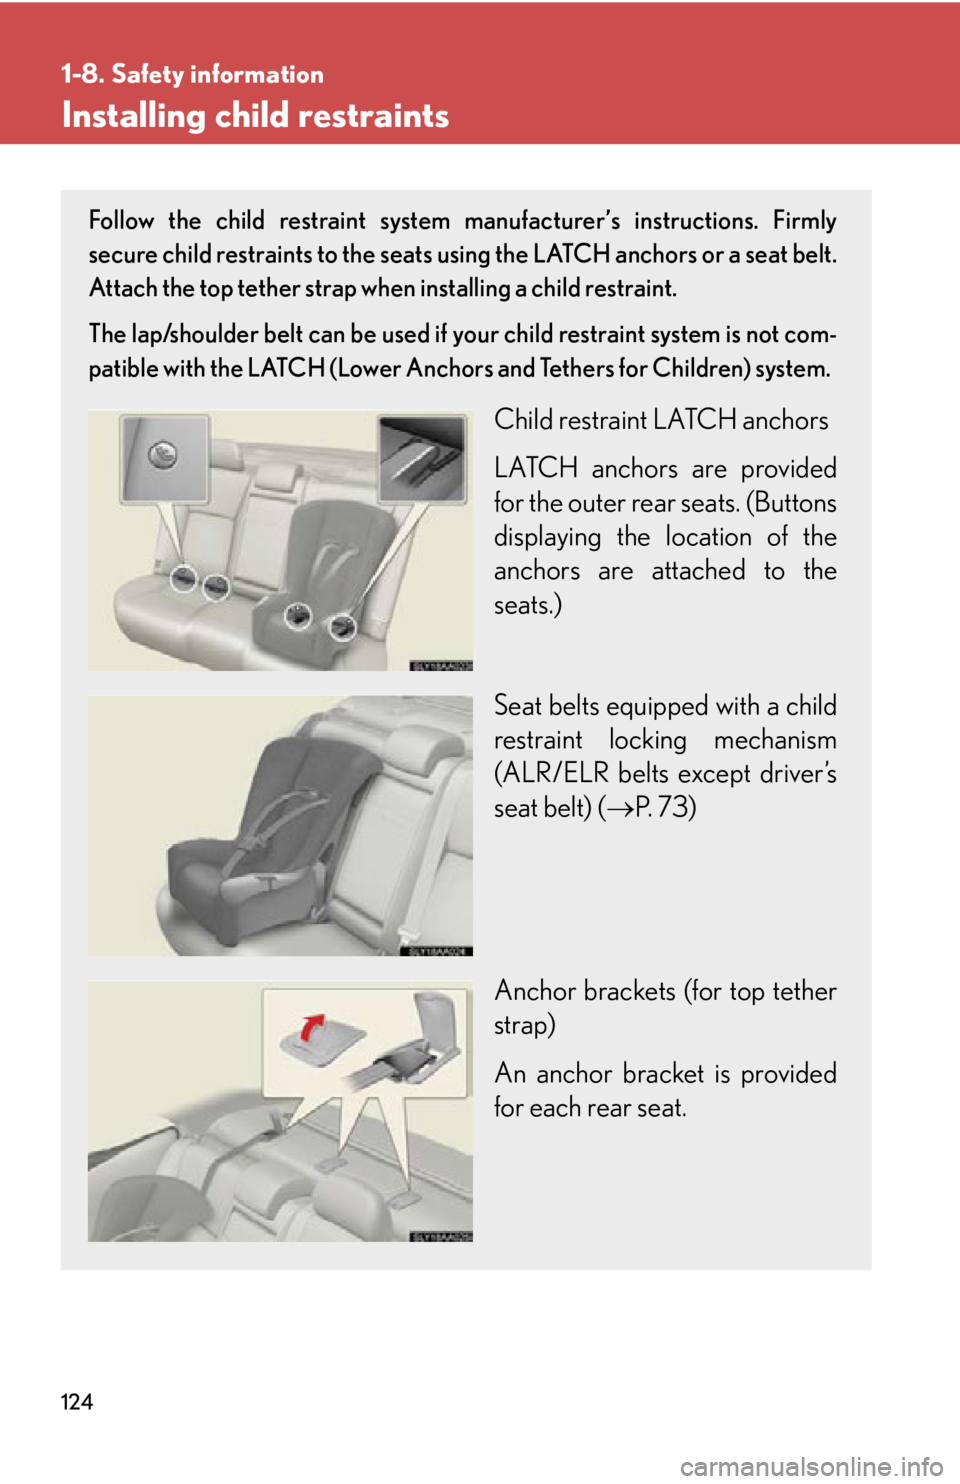 Lexus HS250h 2010  Using the Bluetooth audio system / LEXUS 2010 HS250H OWNERS MANUAL (OM75006U) 124
1-8. Safety information
Installing child restraints
Follow the child restraint system manufacturer’s instructions. Firmly 
secure child restraints to the seats using the LATCH anchors or a seat 